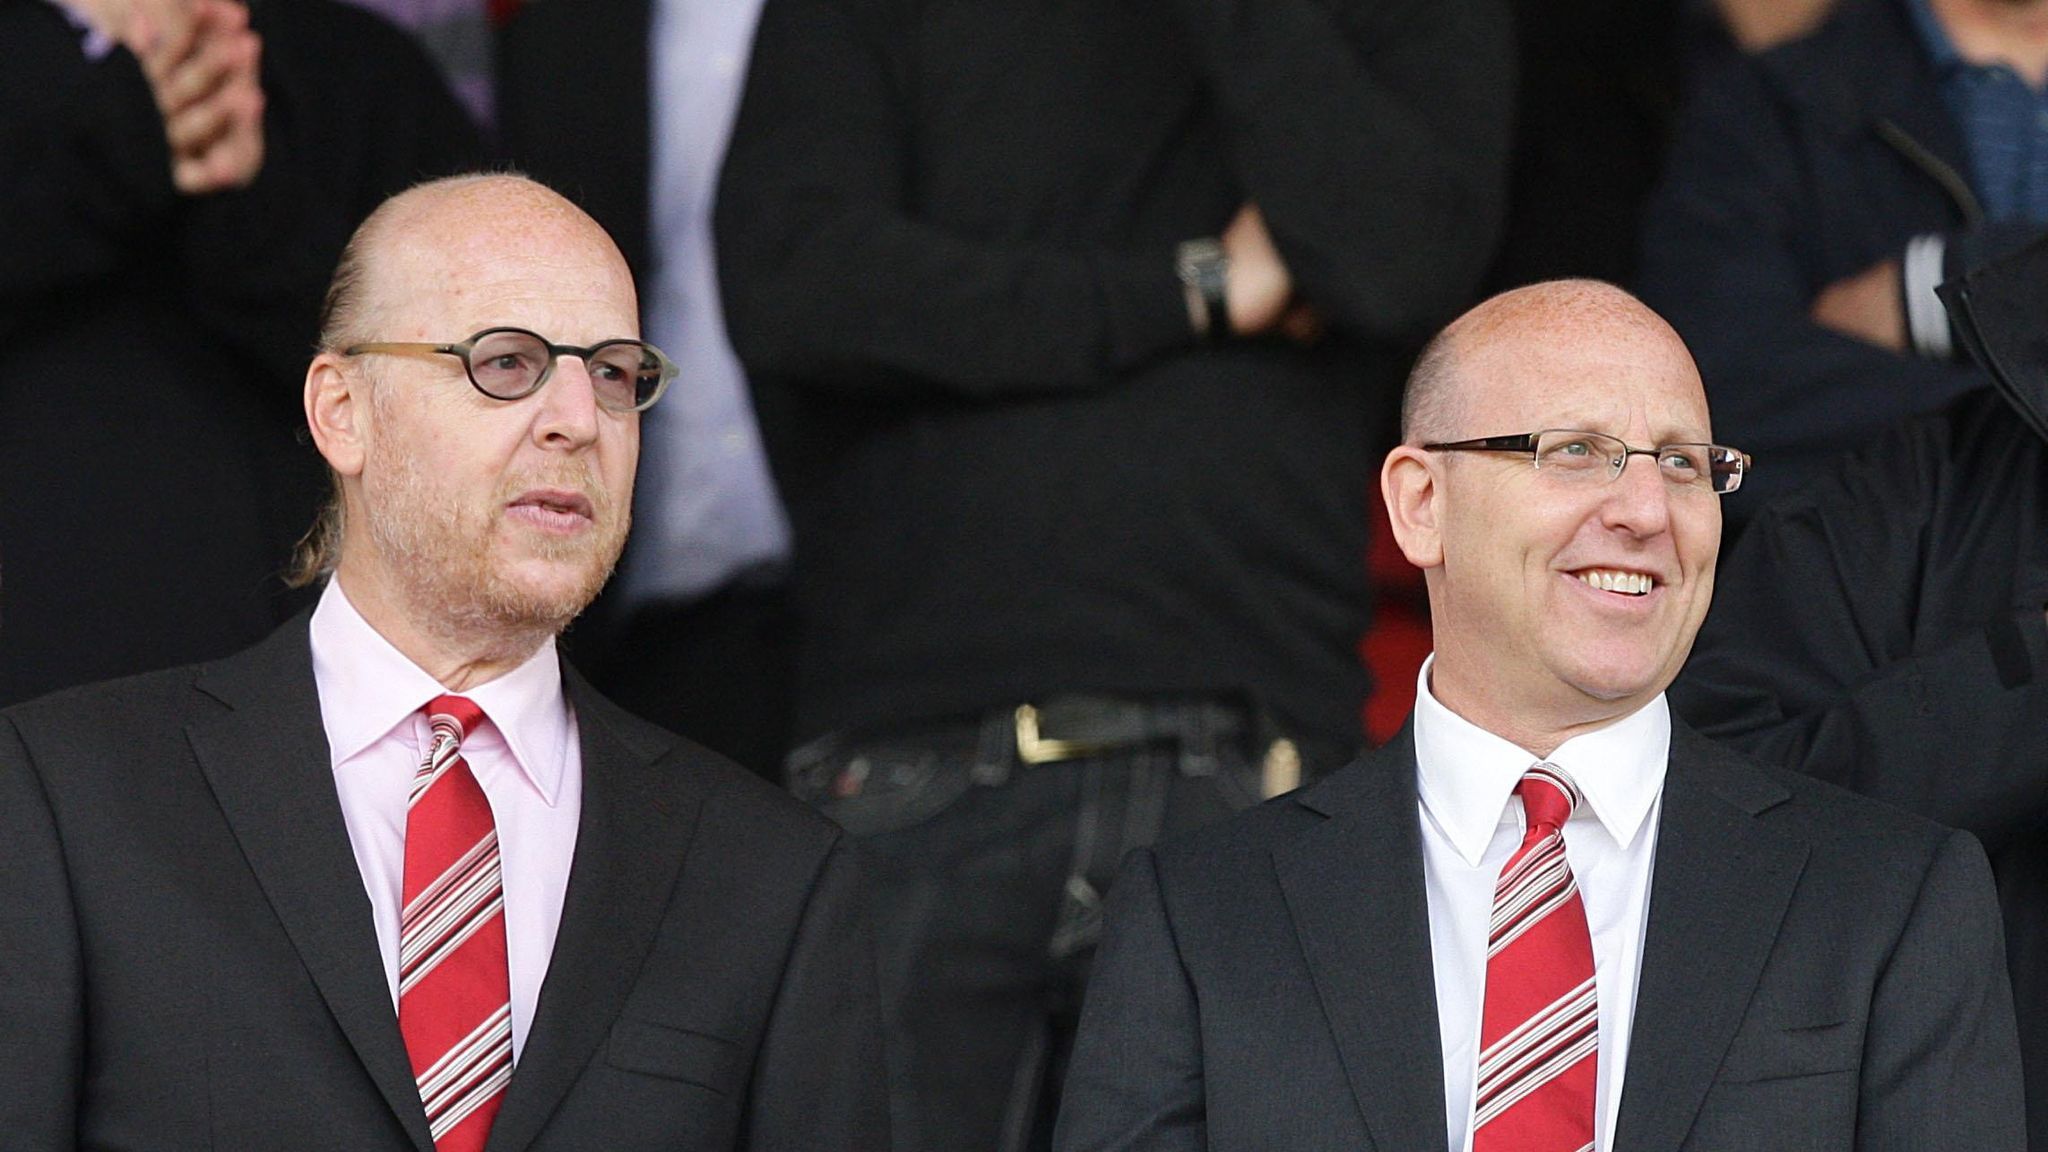 Apple intends to buy Manchester United from the Glazer family